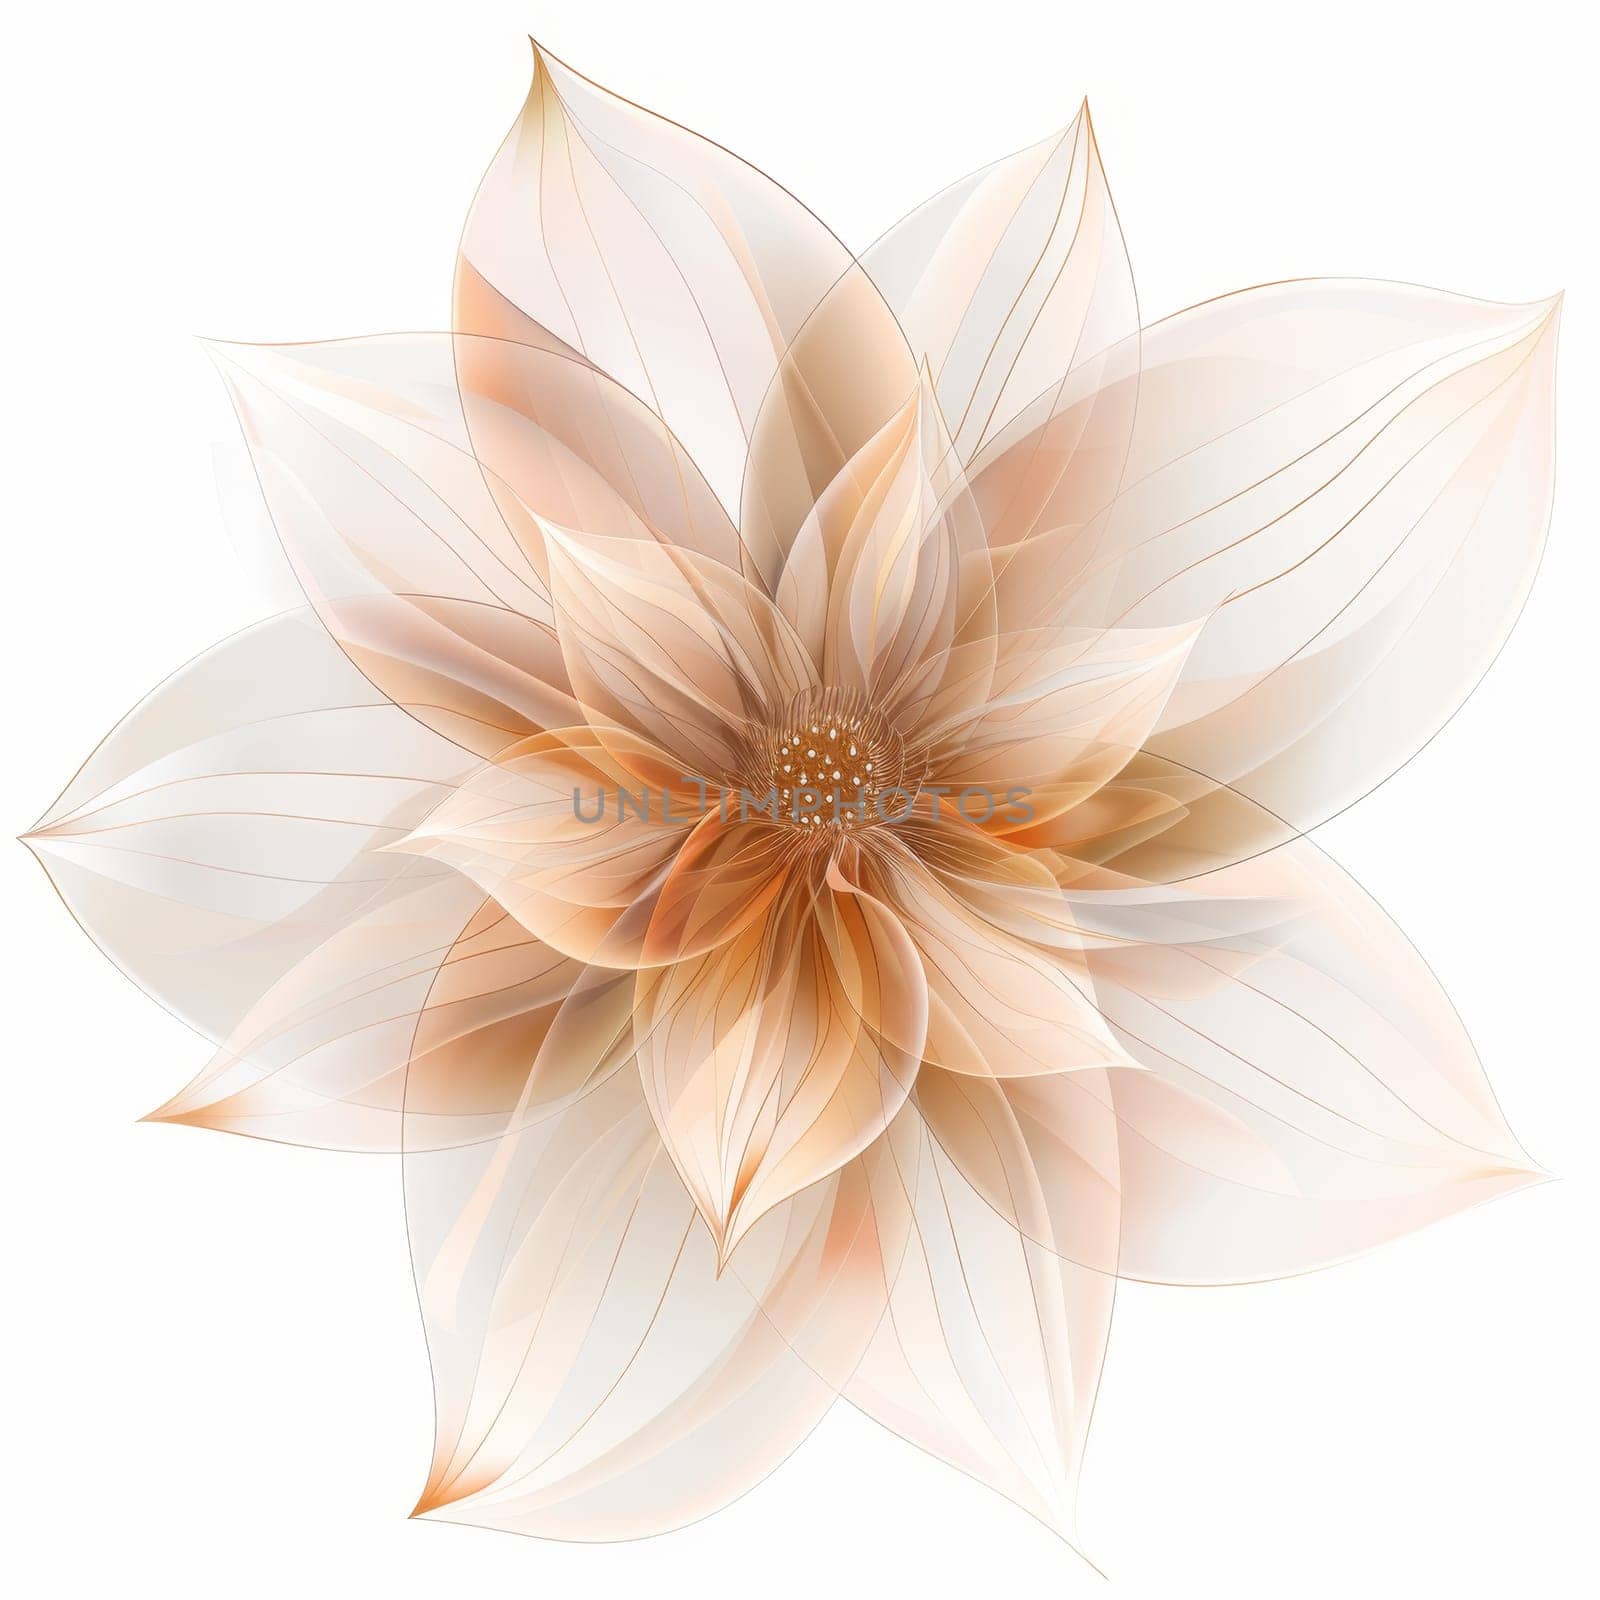 A magical flower bud with petals on a white background. Illustration.